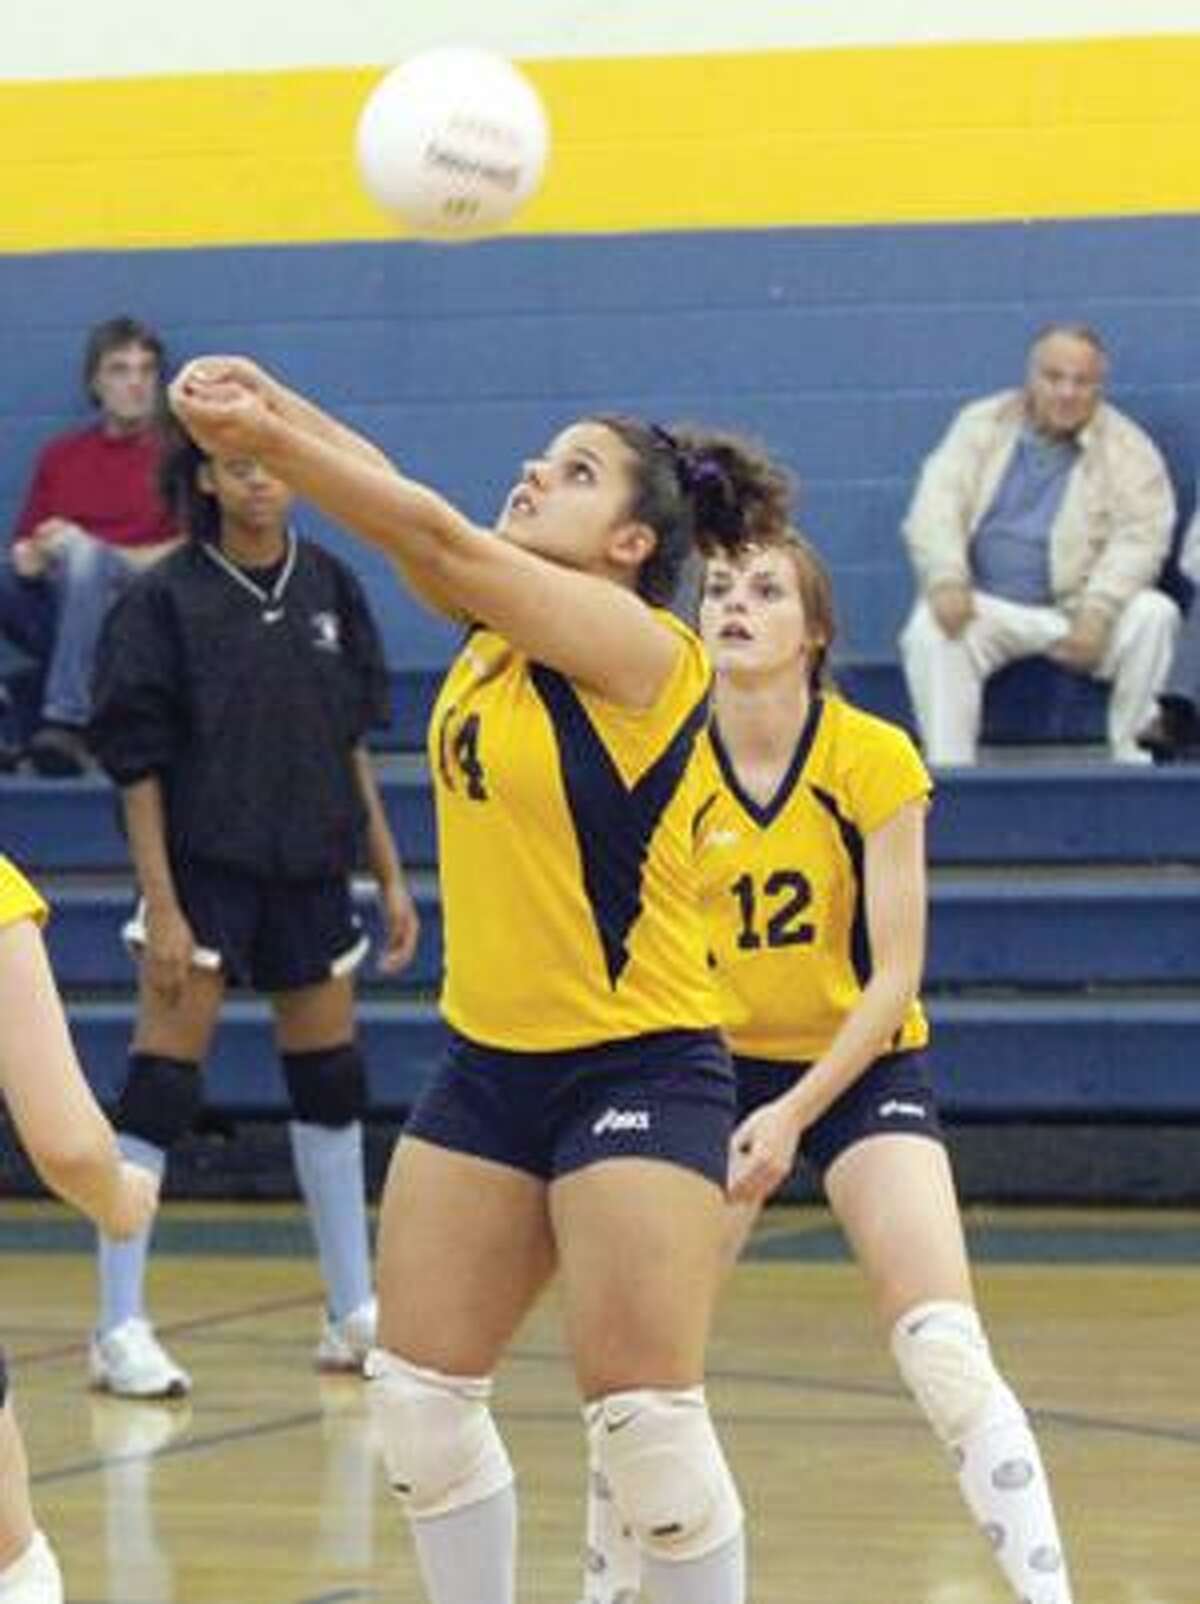 Gilbert's Frankie Marino returns a serve against Sports & Medical Sciences Academy Friday in Winsted.